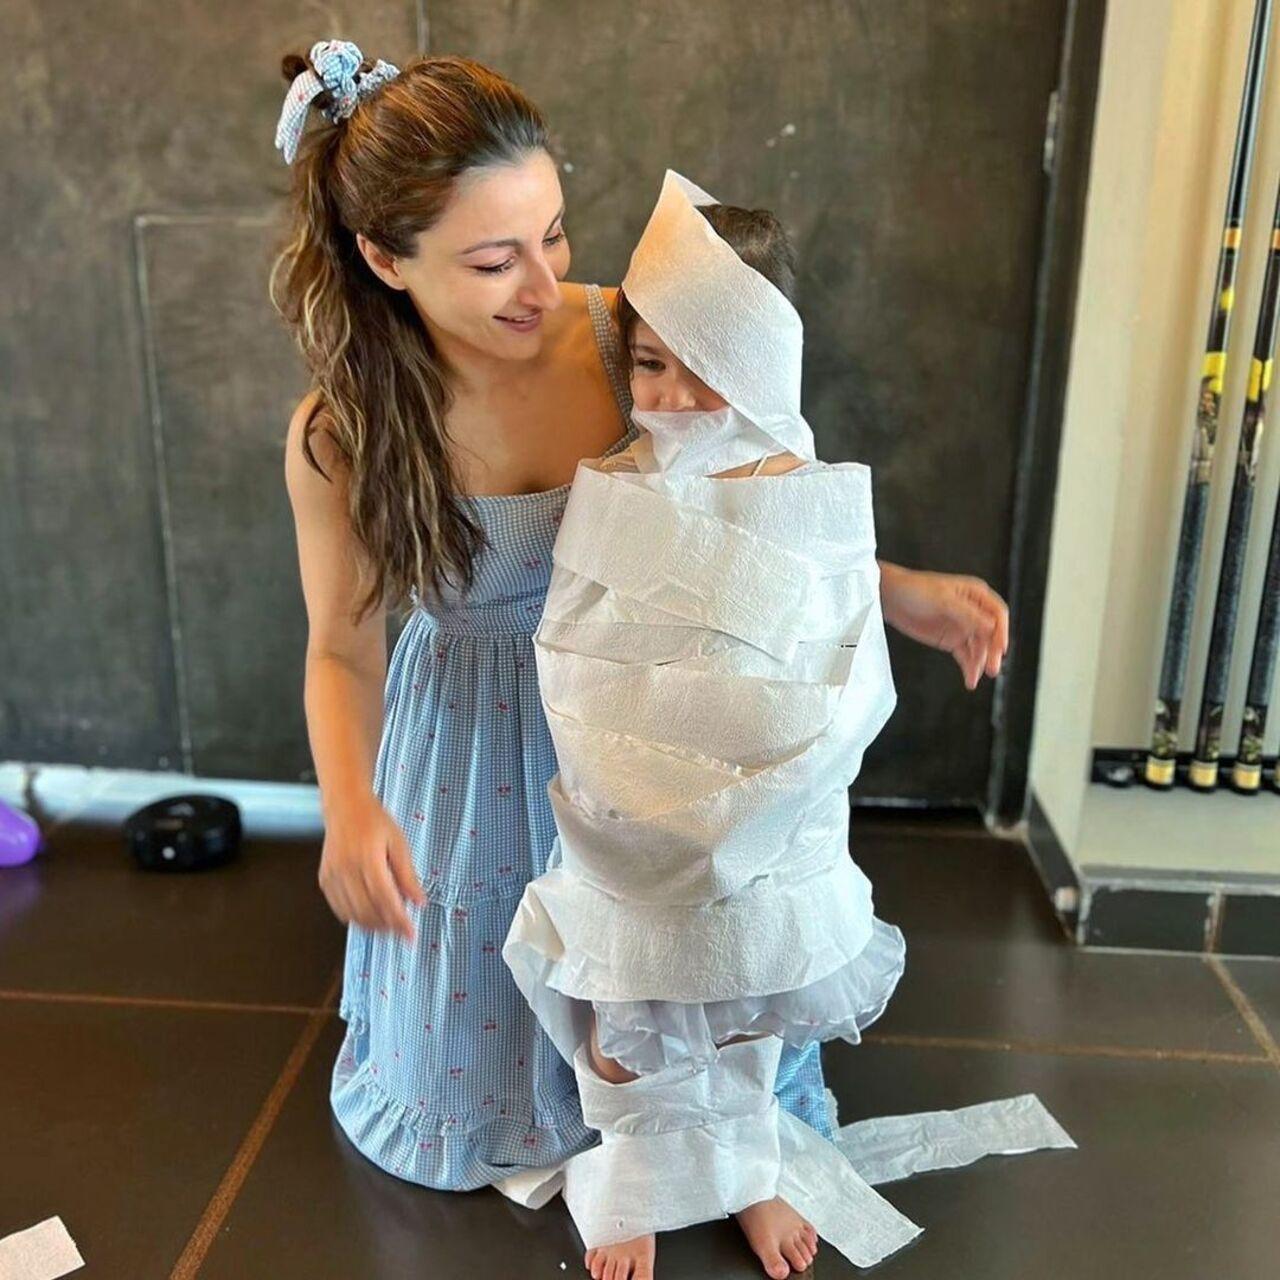 Wrapped in tissue paper, Inaaya Naumi Kemmu looked cute